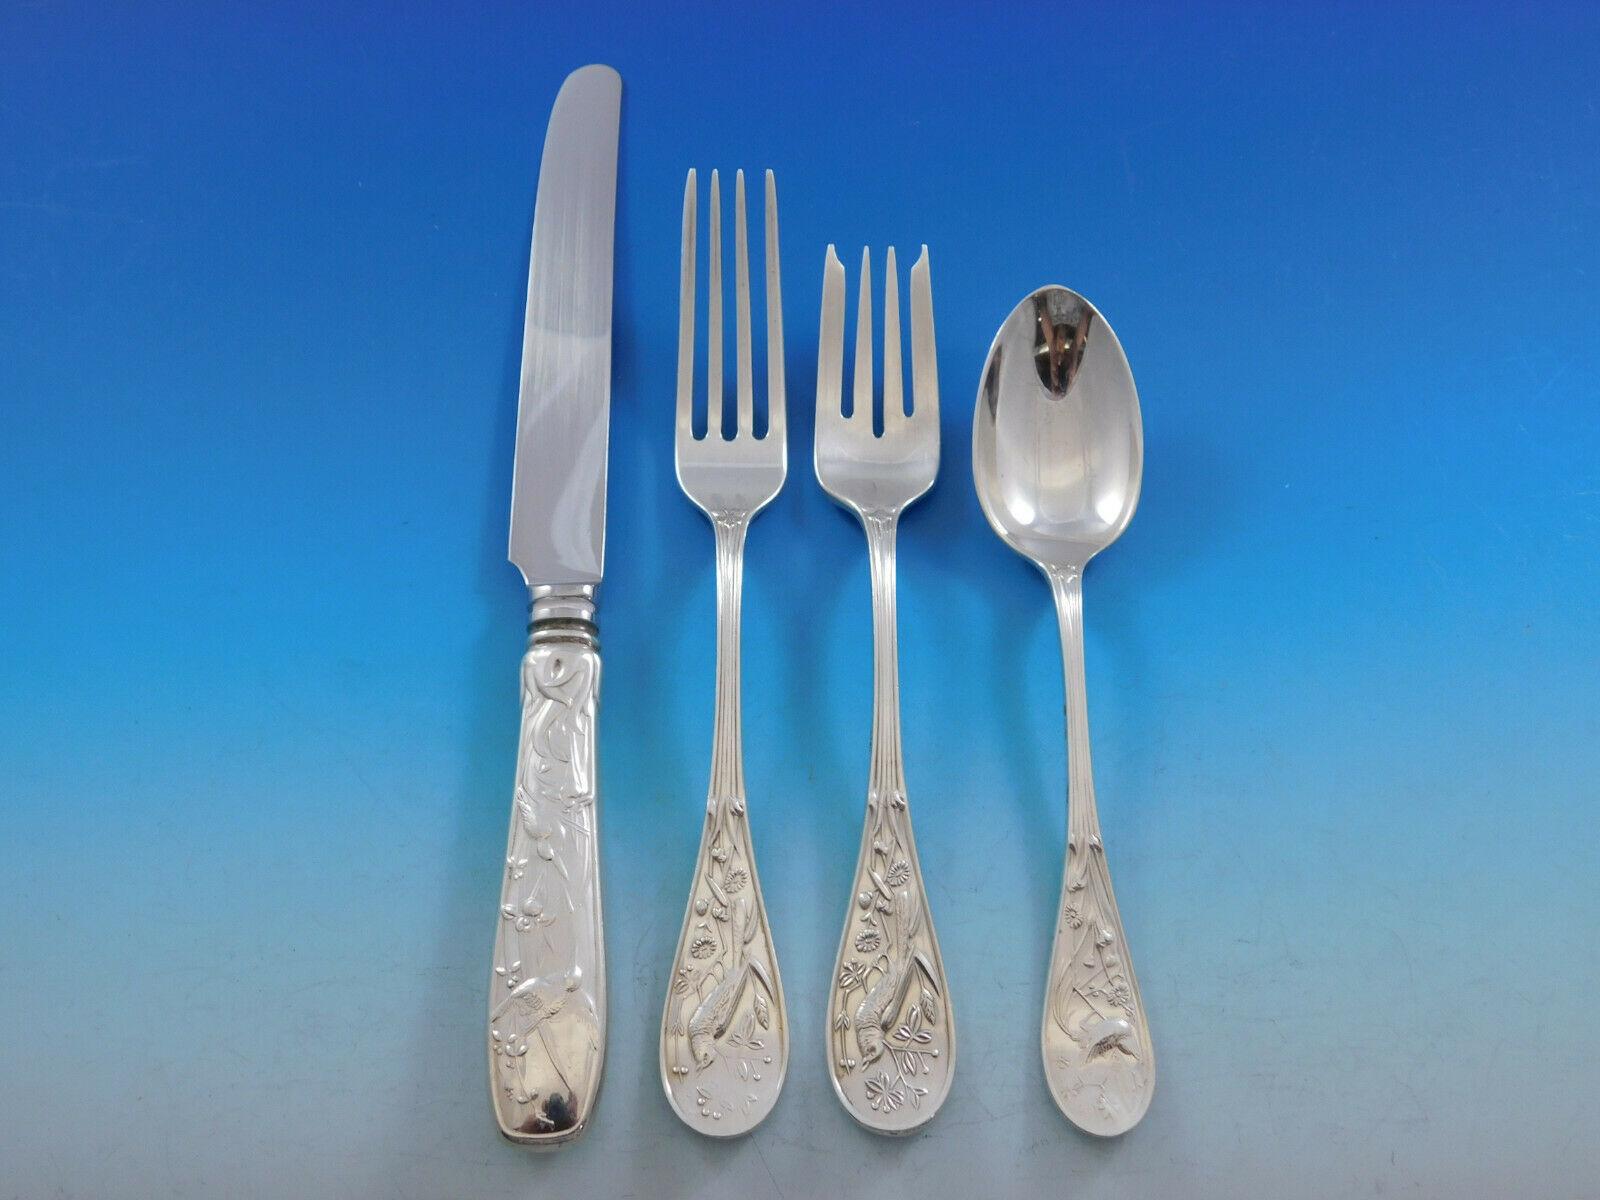 Audubon by Tiffany & Co. sterling silver flatware set, 47 pieces. This set includes:

8 regular knives, 9 1/8